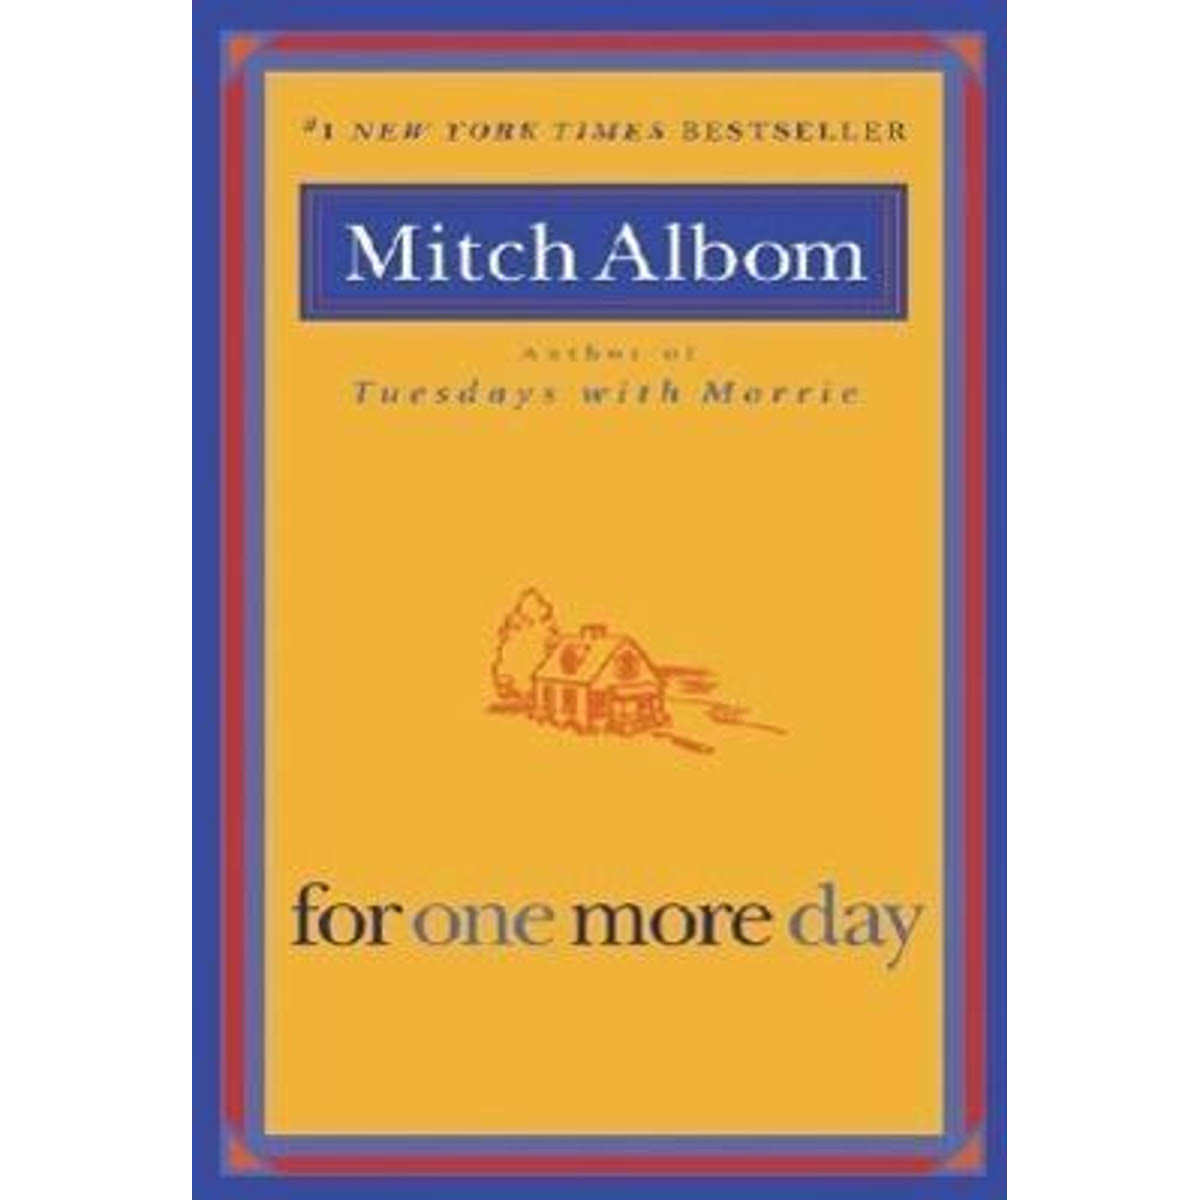 For One More Day [Book]